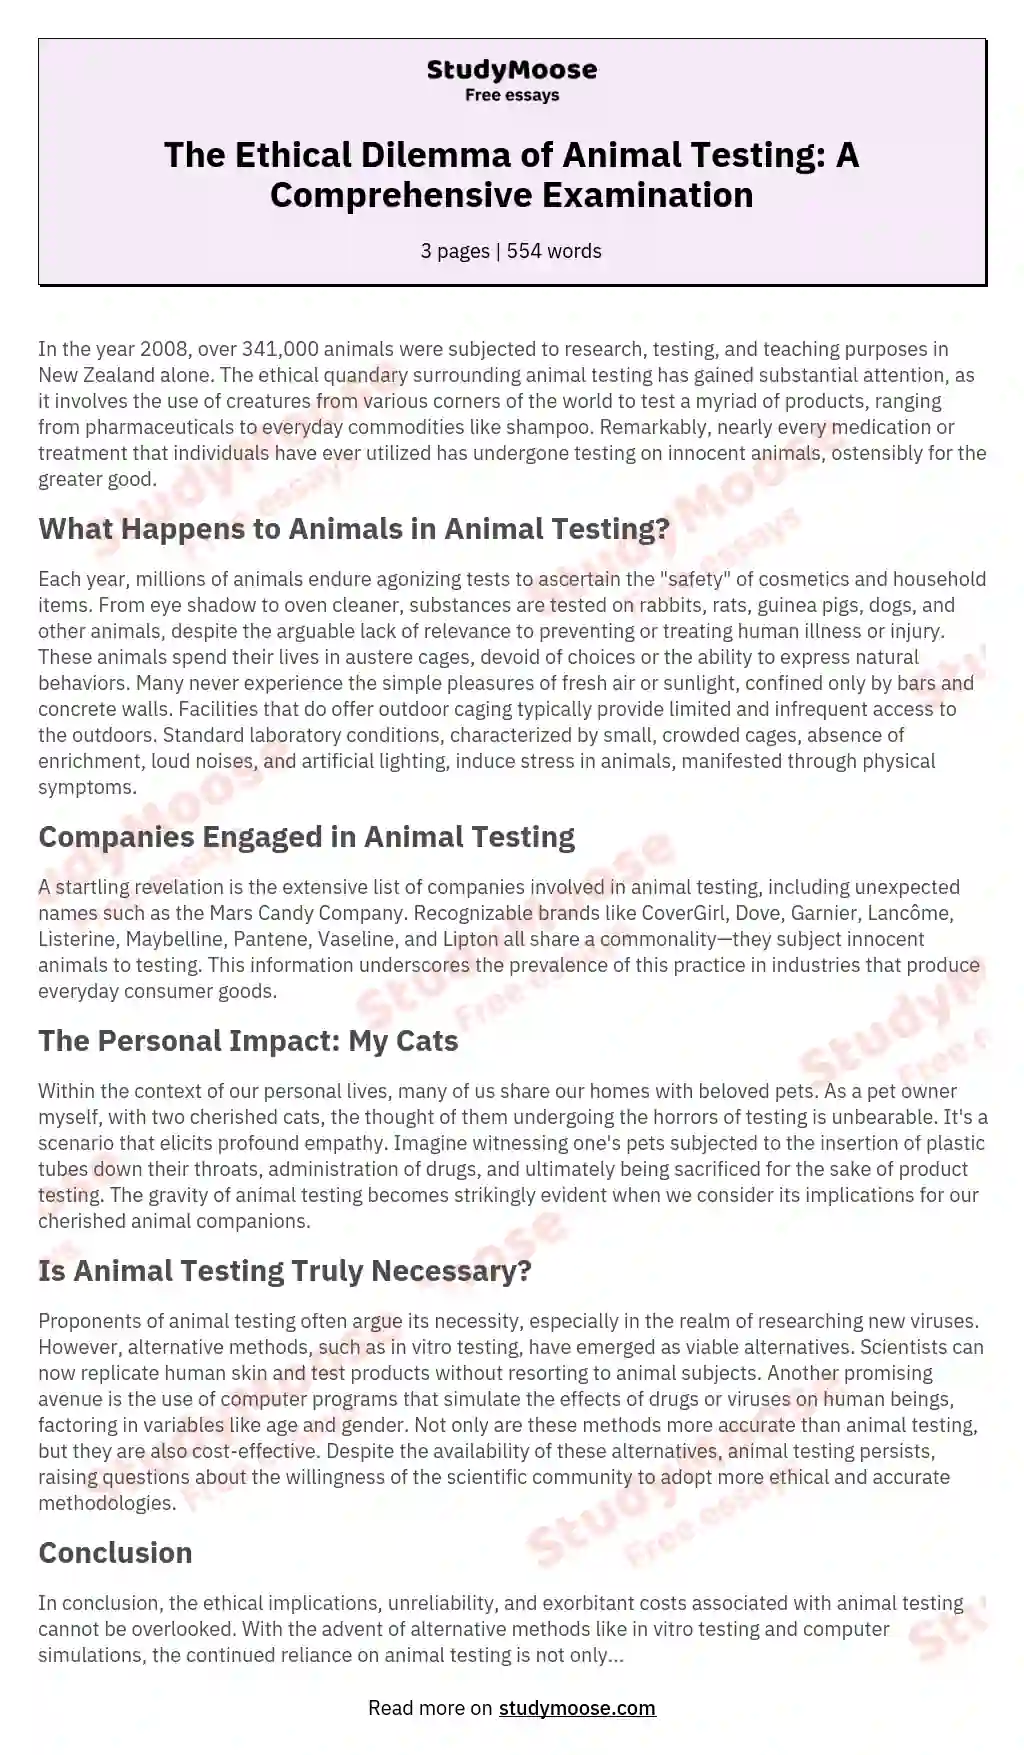 The Ethical Dilemma of Animal Testing: A Comprehensive Examination essay